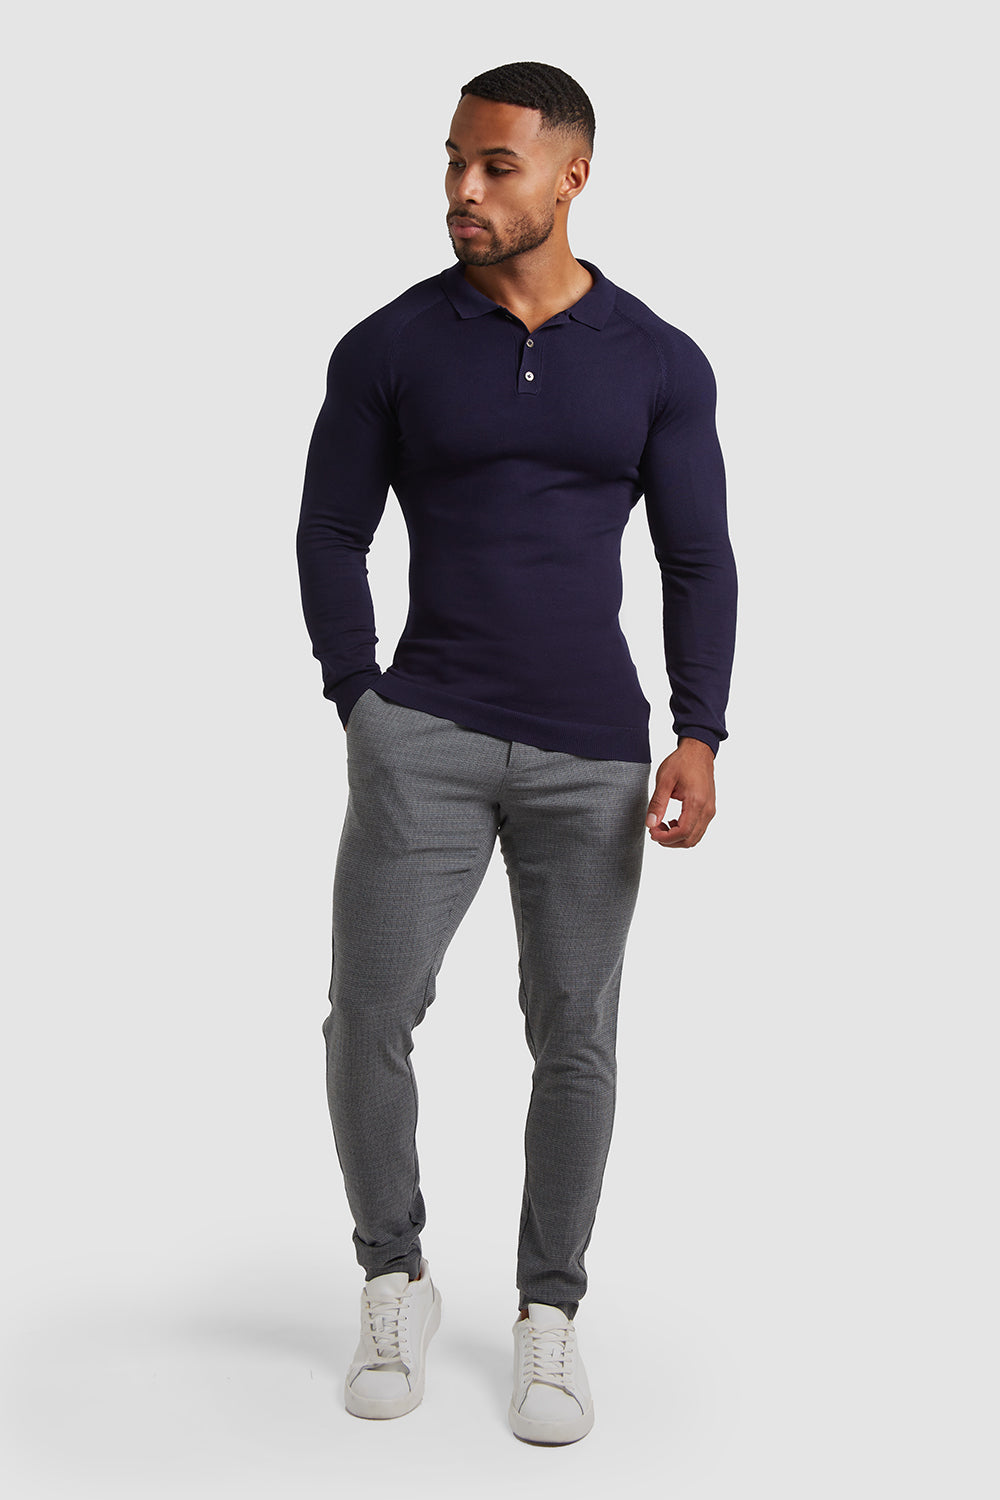 Everyday Henley in Navy - TAILORED ATHLETE - USA